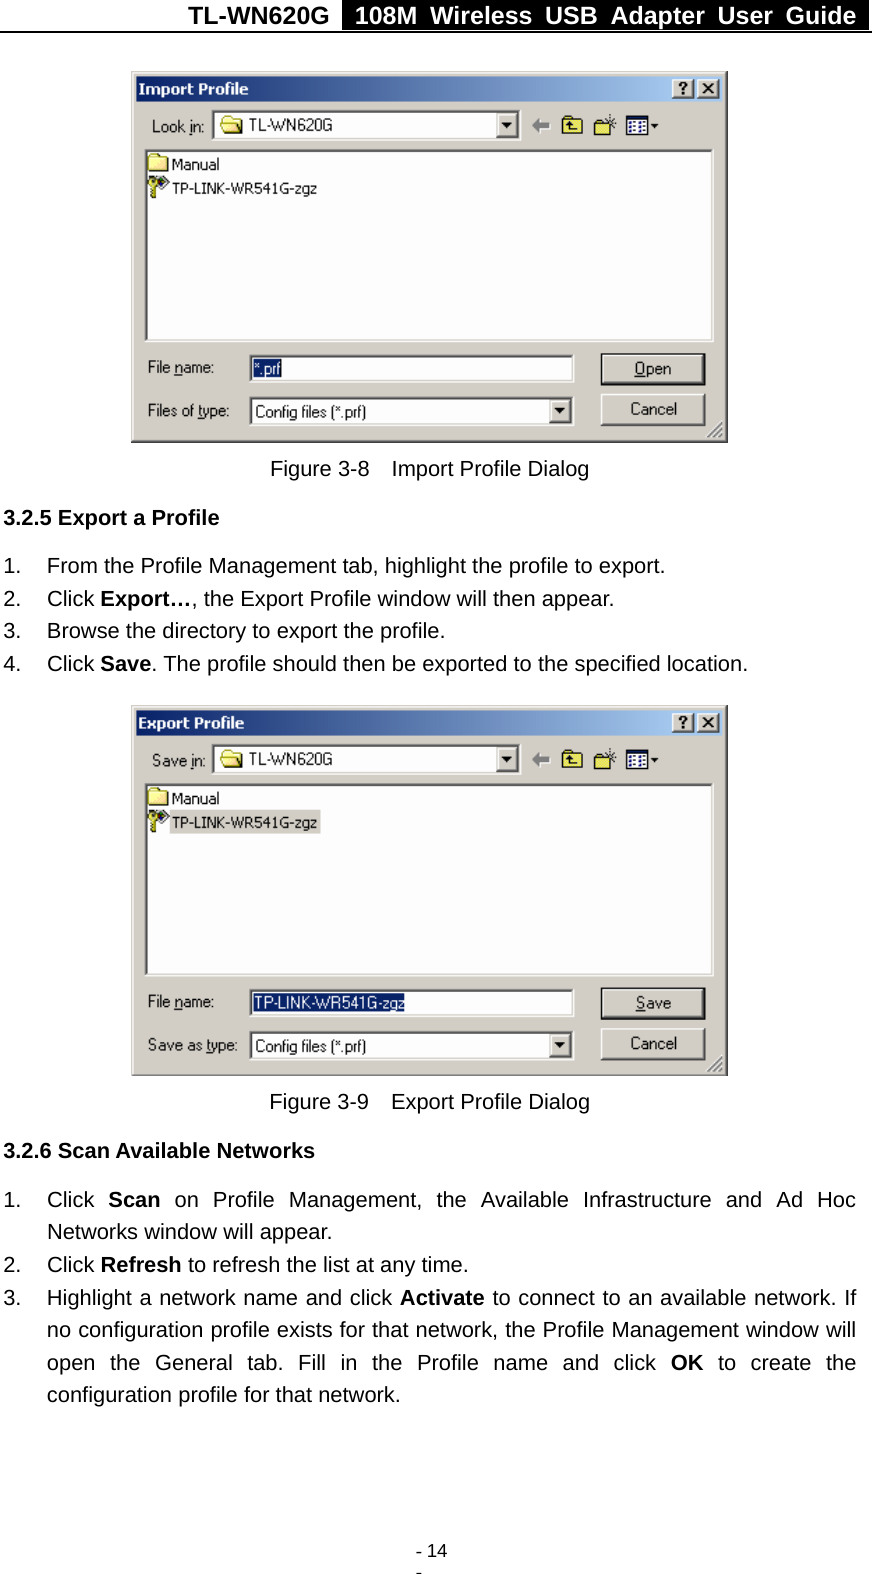 TL-WN620G   108M Wireless USB Adapter User Guide    - 14 -  Figure 3-8    Import Profile Dialog 3.2.5 Export a Profile 1.  From the Profile Management tab, highlight the profile to export. 2. Click Export…, the Export Profile window will then appear. 3.  Browse the directory to export the profile. 4. Click Save. The profile should then be exported to the specified location.  Figure 3-9    Export Profile Dialog 3.2.6 Scan Available Networks 1. Click Scan on Profile Management, the Available Infrastructure and Ad Hoc Networks window will appear. 2. Click Refresh to refresh the list at any time. 3.  Highlight a network name and click Activate to connect to an available network. If no configuration profile exists for that network, the Profile Management window will open the General tab. Fill in the Profile name and click OK to create the configuration profile for that network. 